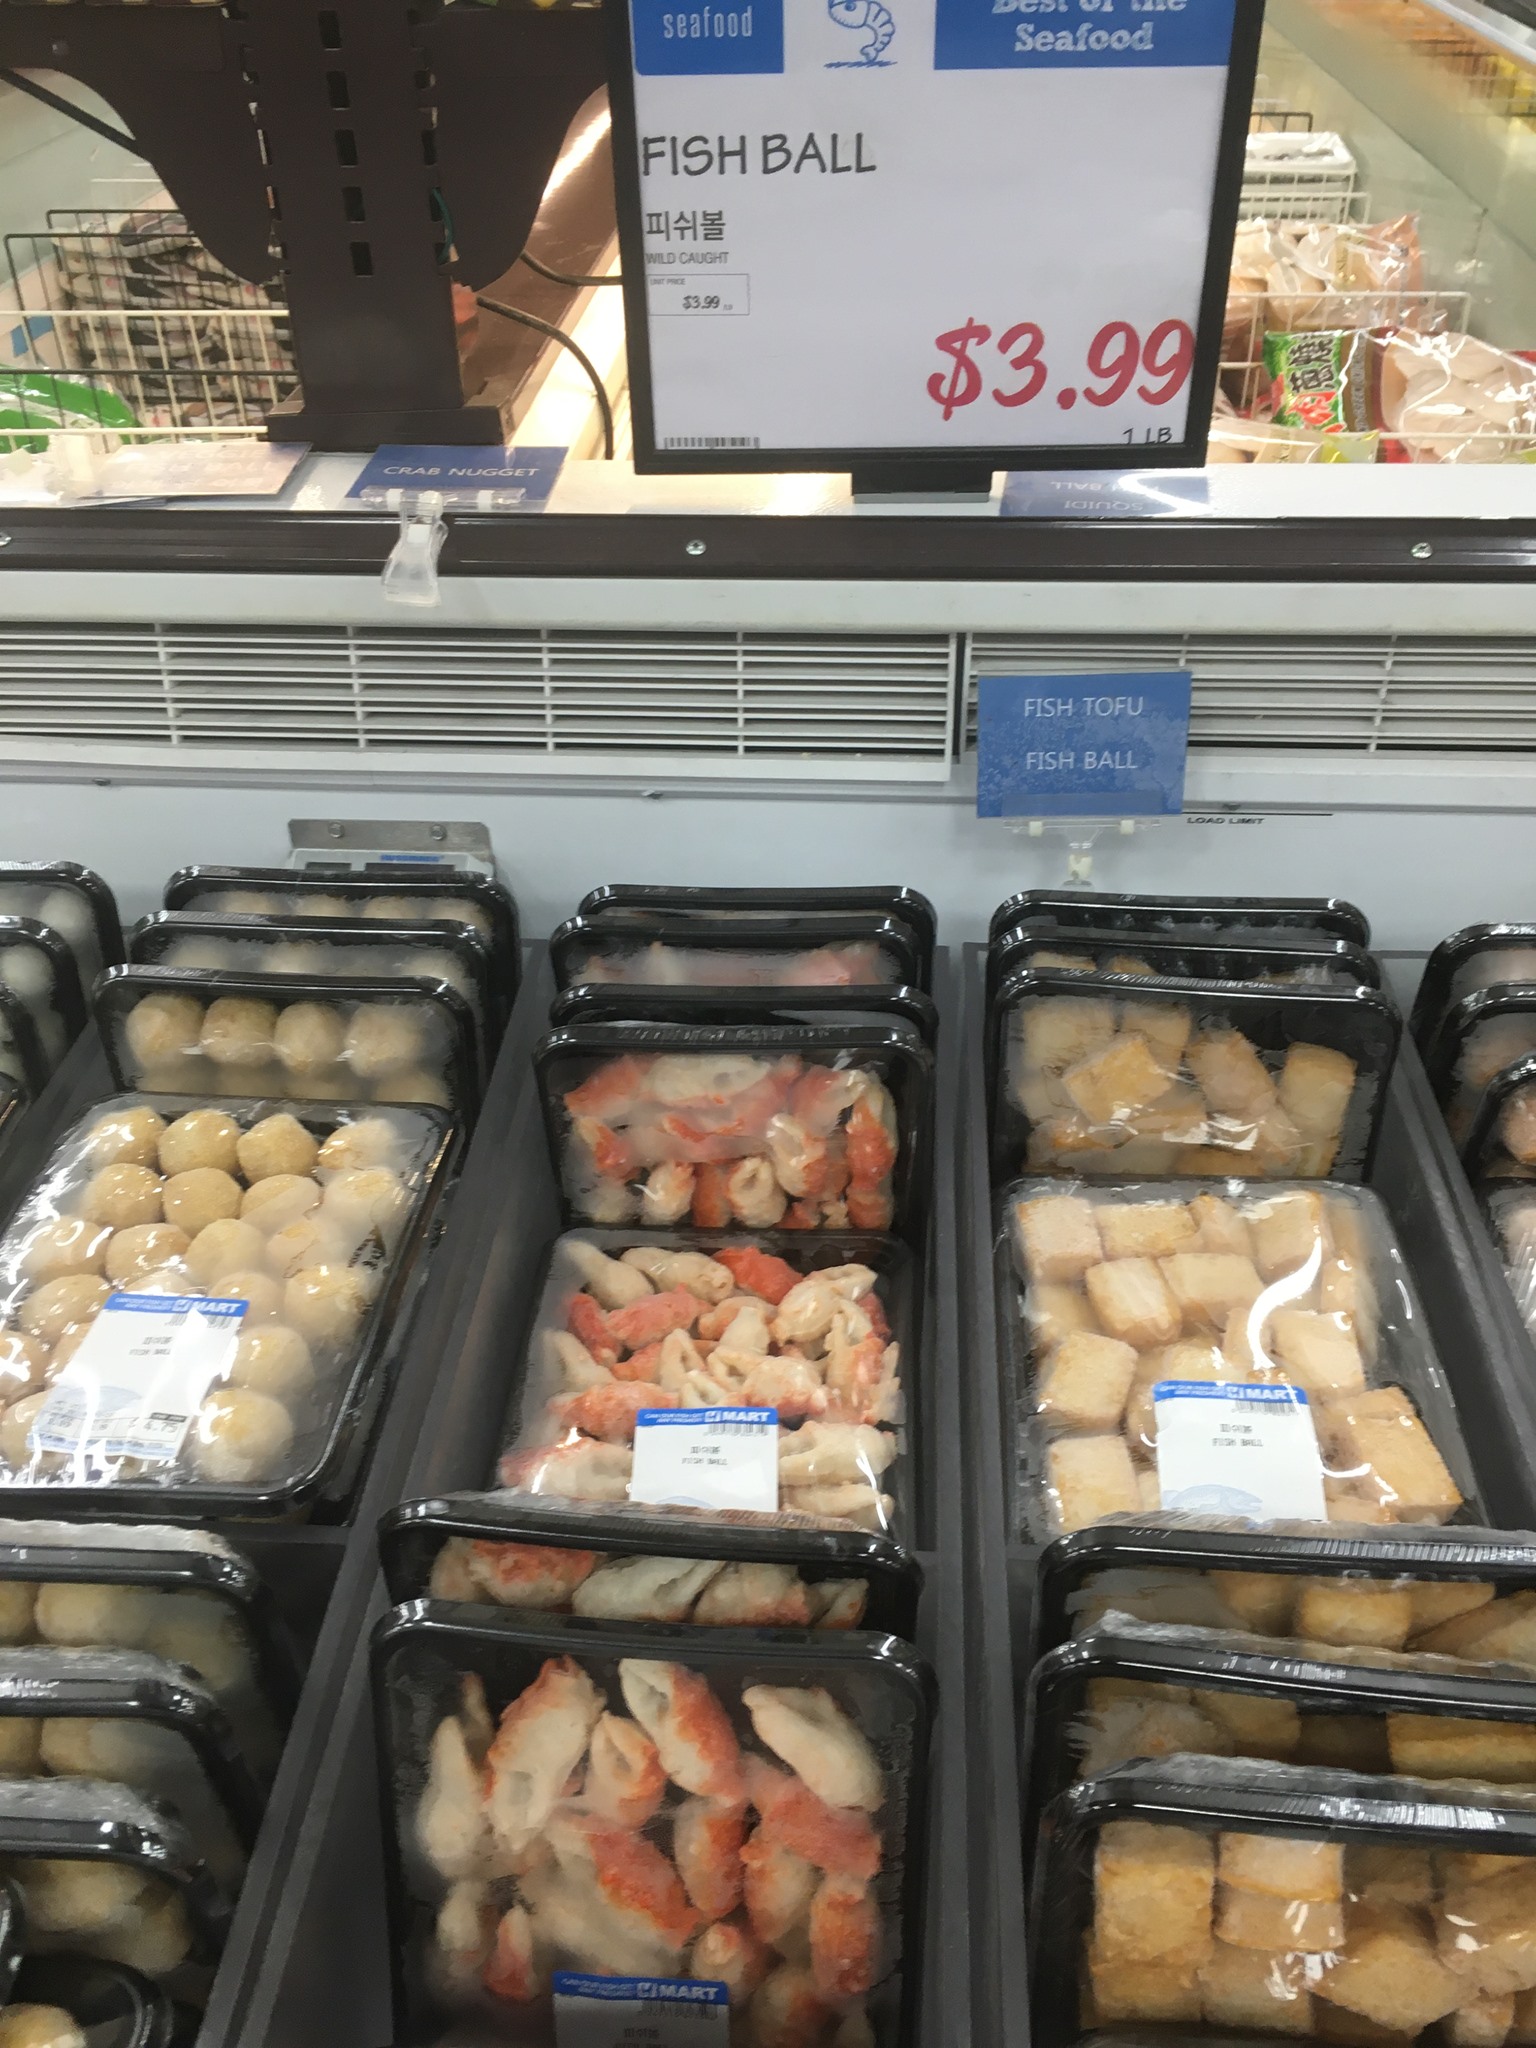 Packaged fish balls and imitation crab meat at a Korean market, sold for $3.99/lb.